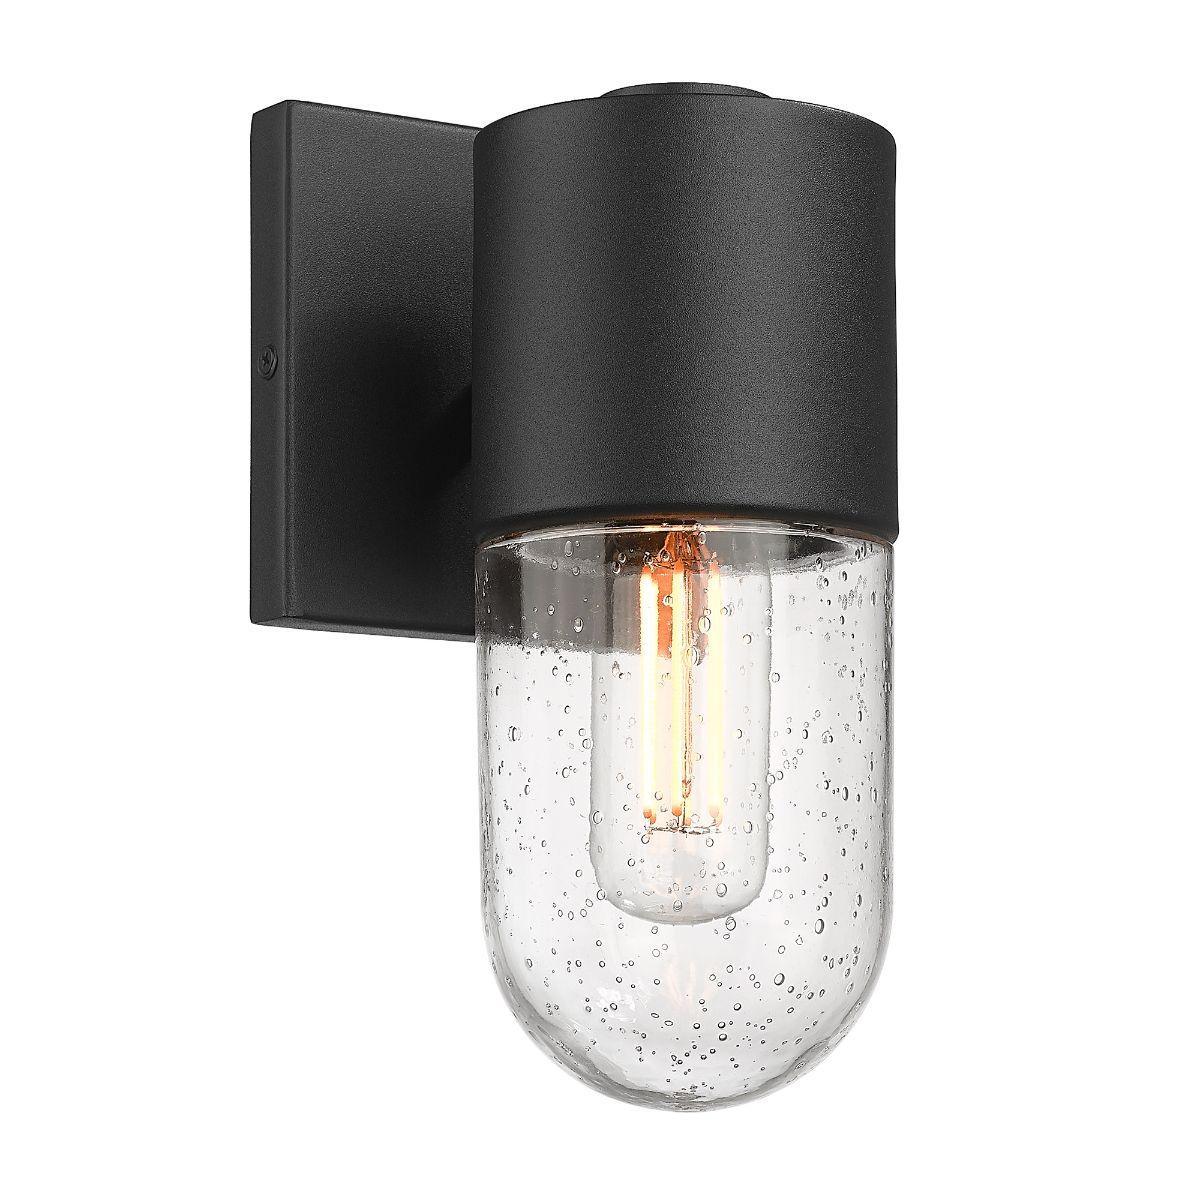 Ezra 10 in. Outdoor Wall Sconce Black Finish